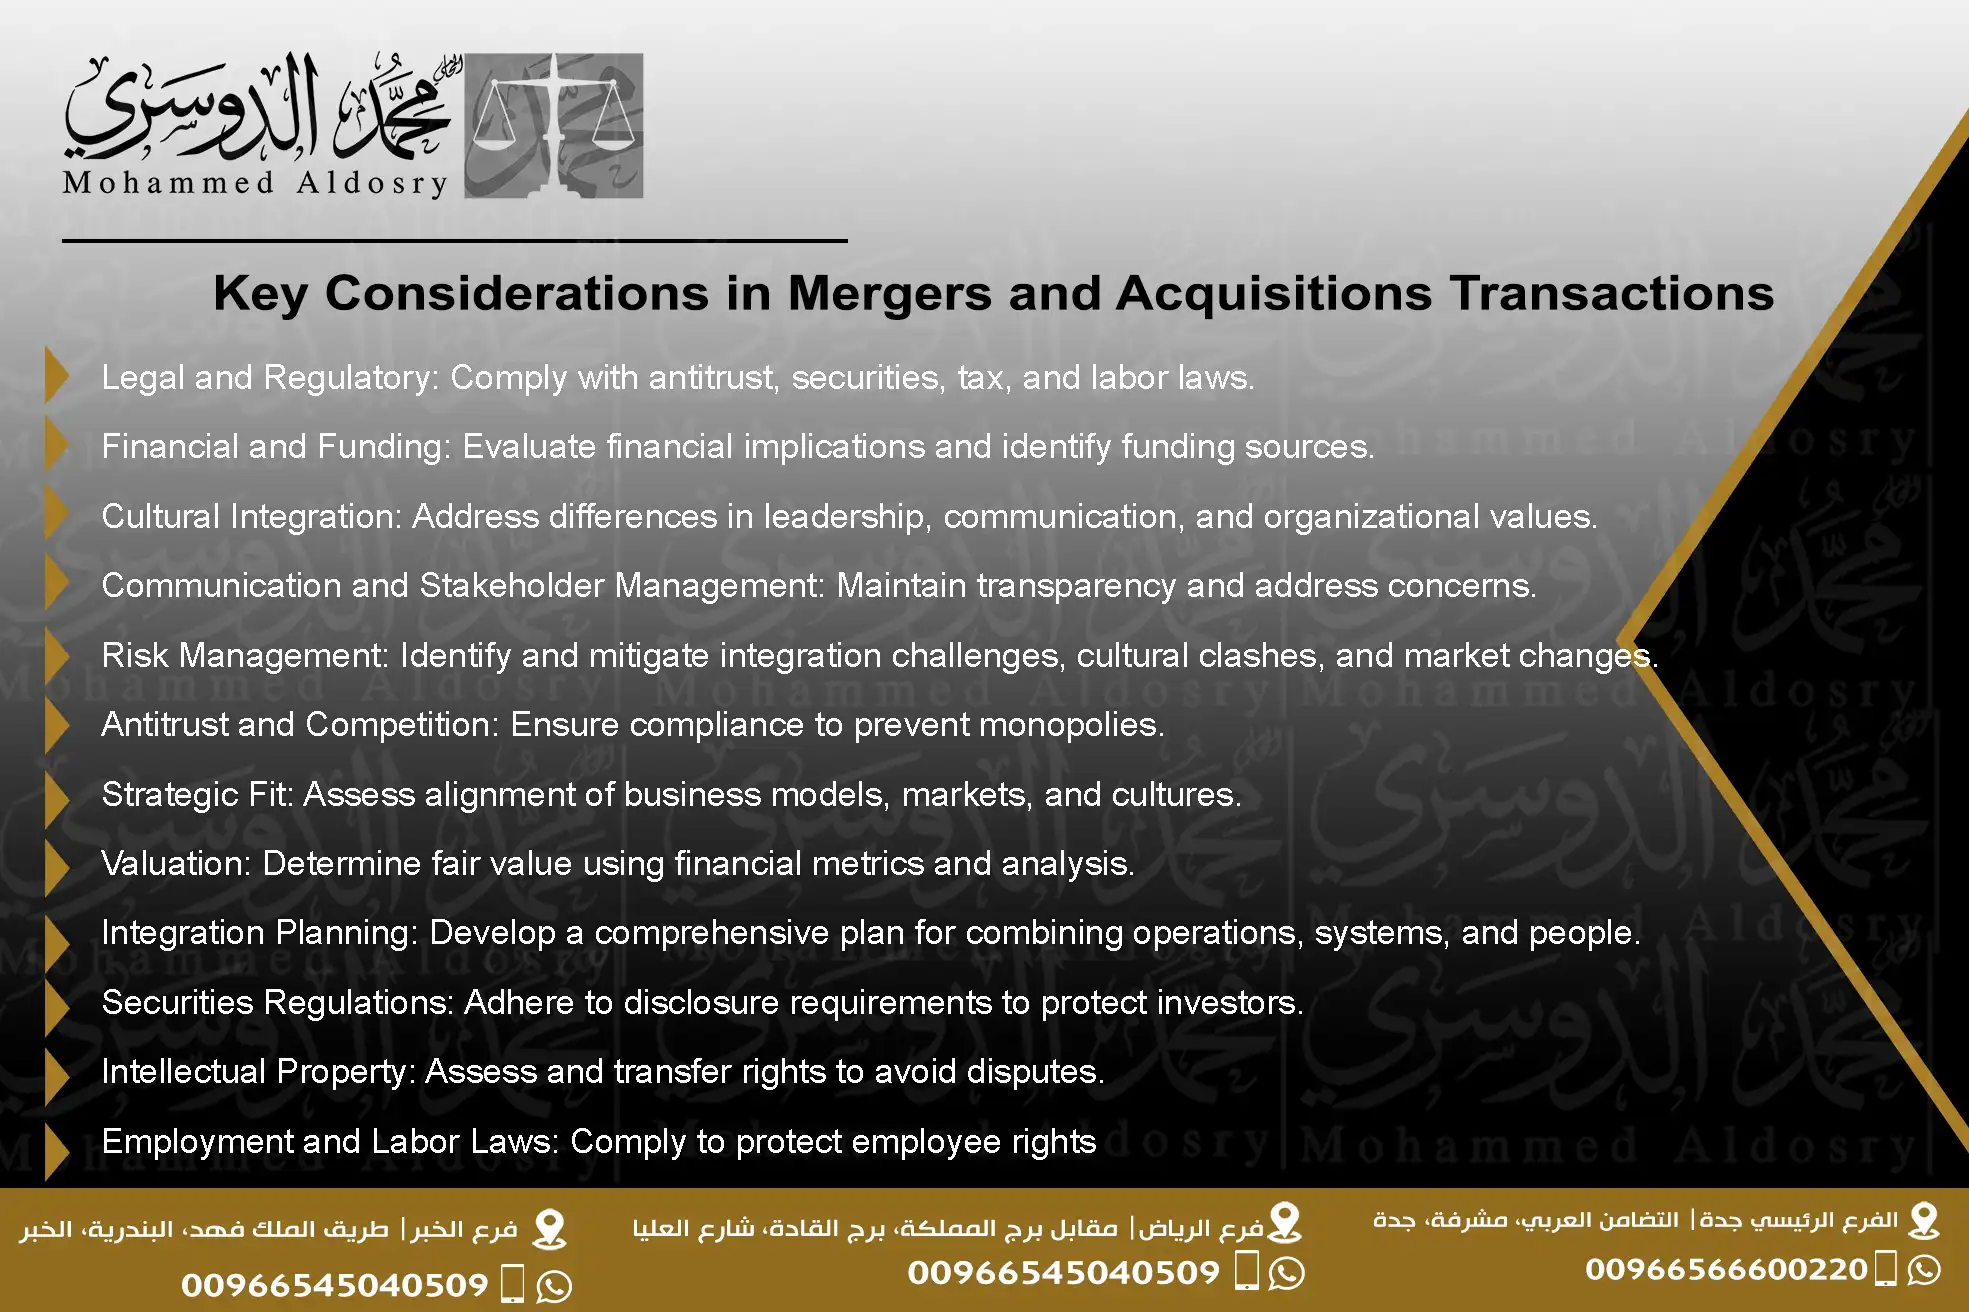 Key Considerations in Mergers and Acquisitions Transactions.